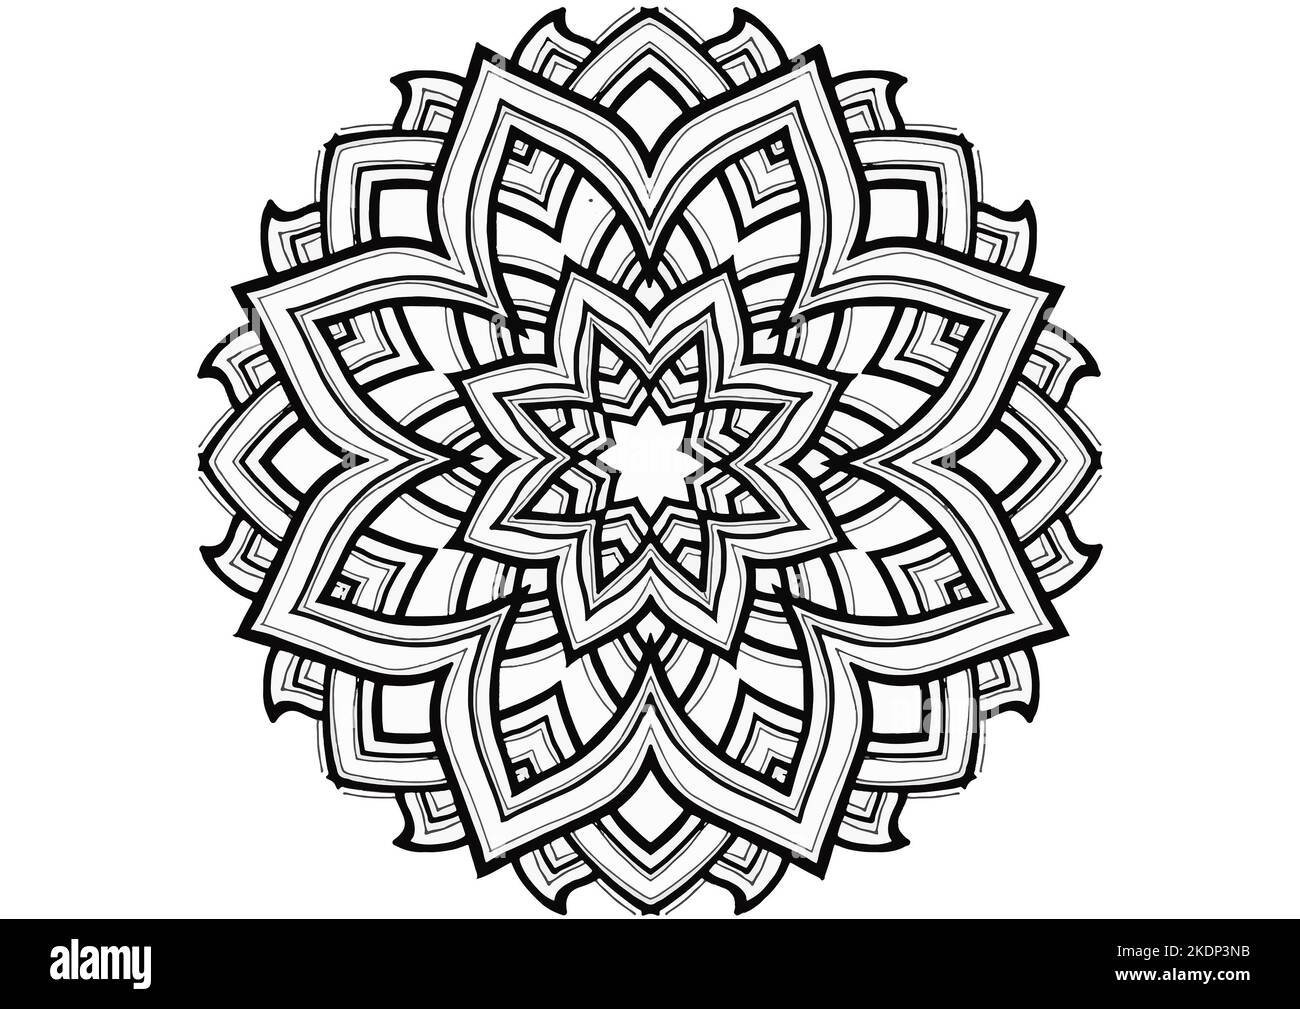 Mantra Mandala, The Meditation art for Adults to coloring Drawing with Hands By Art By Uncle 005  Find out with Patterns of the Universe Stock Photo